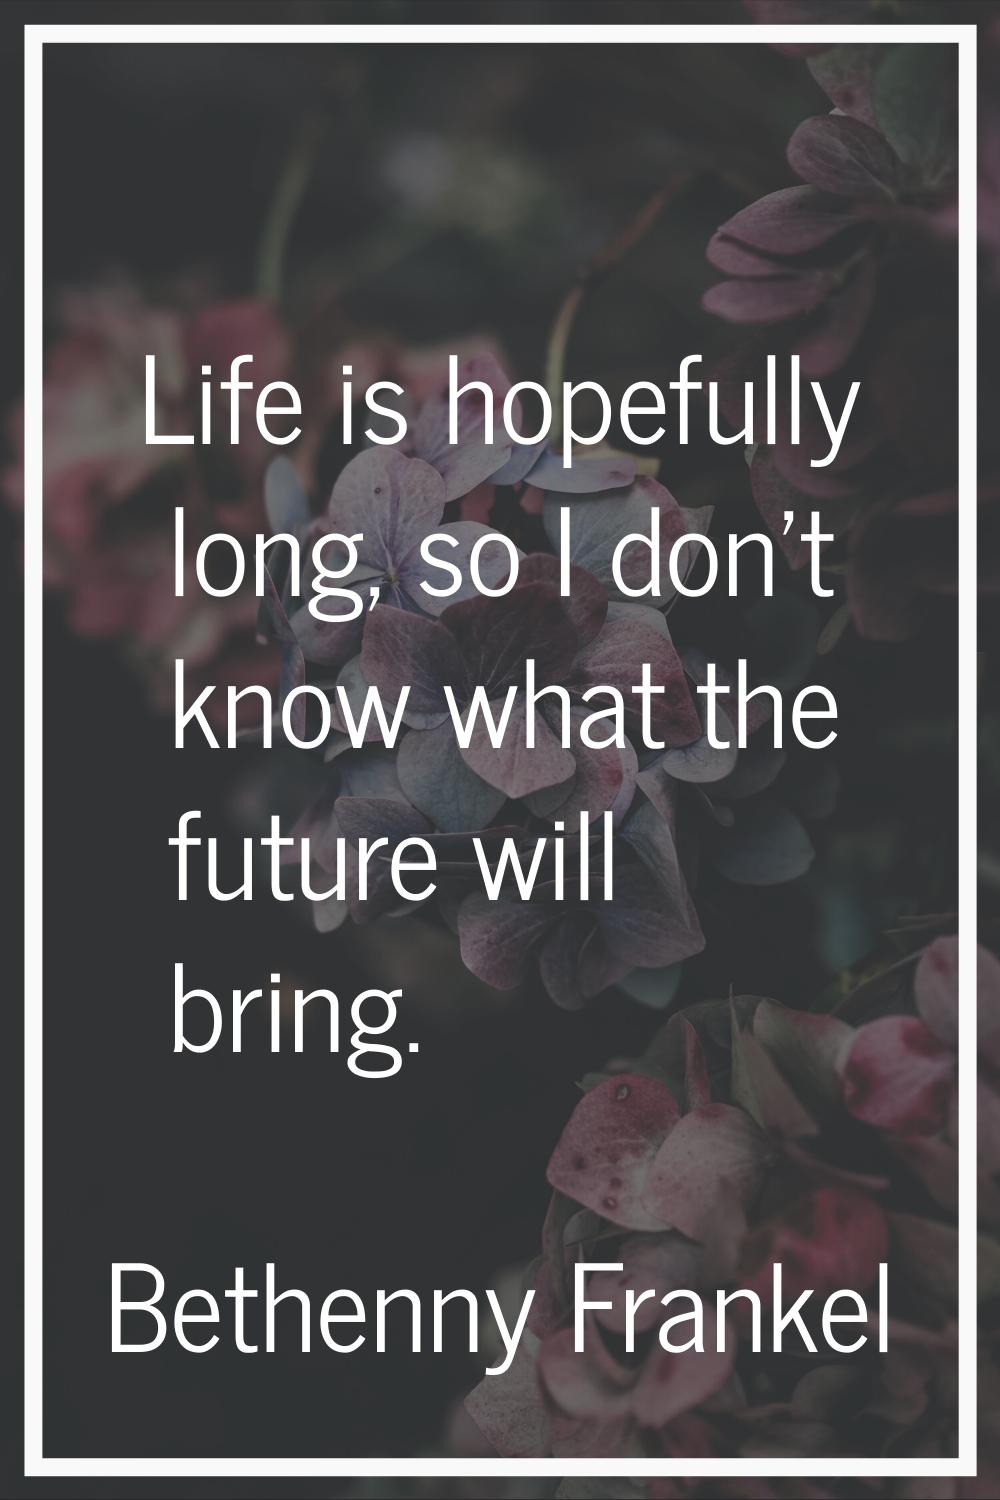 Life is hopefully long, so I don't know what the future will bring.